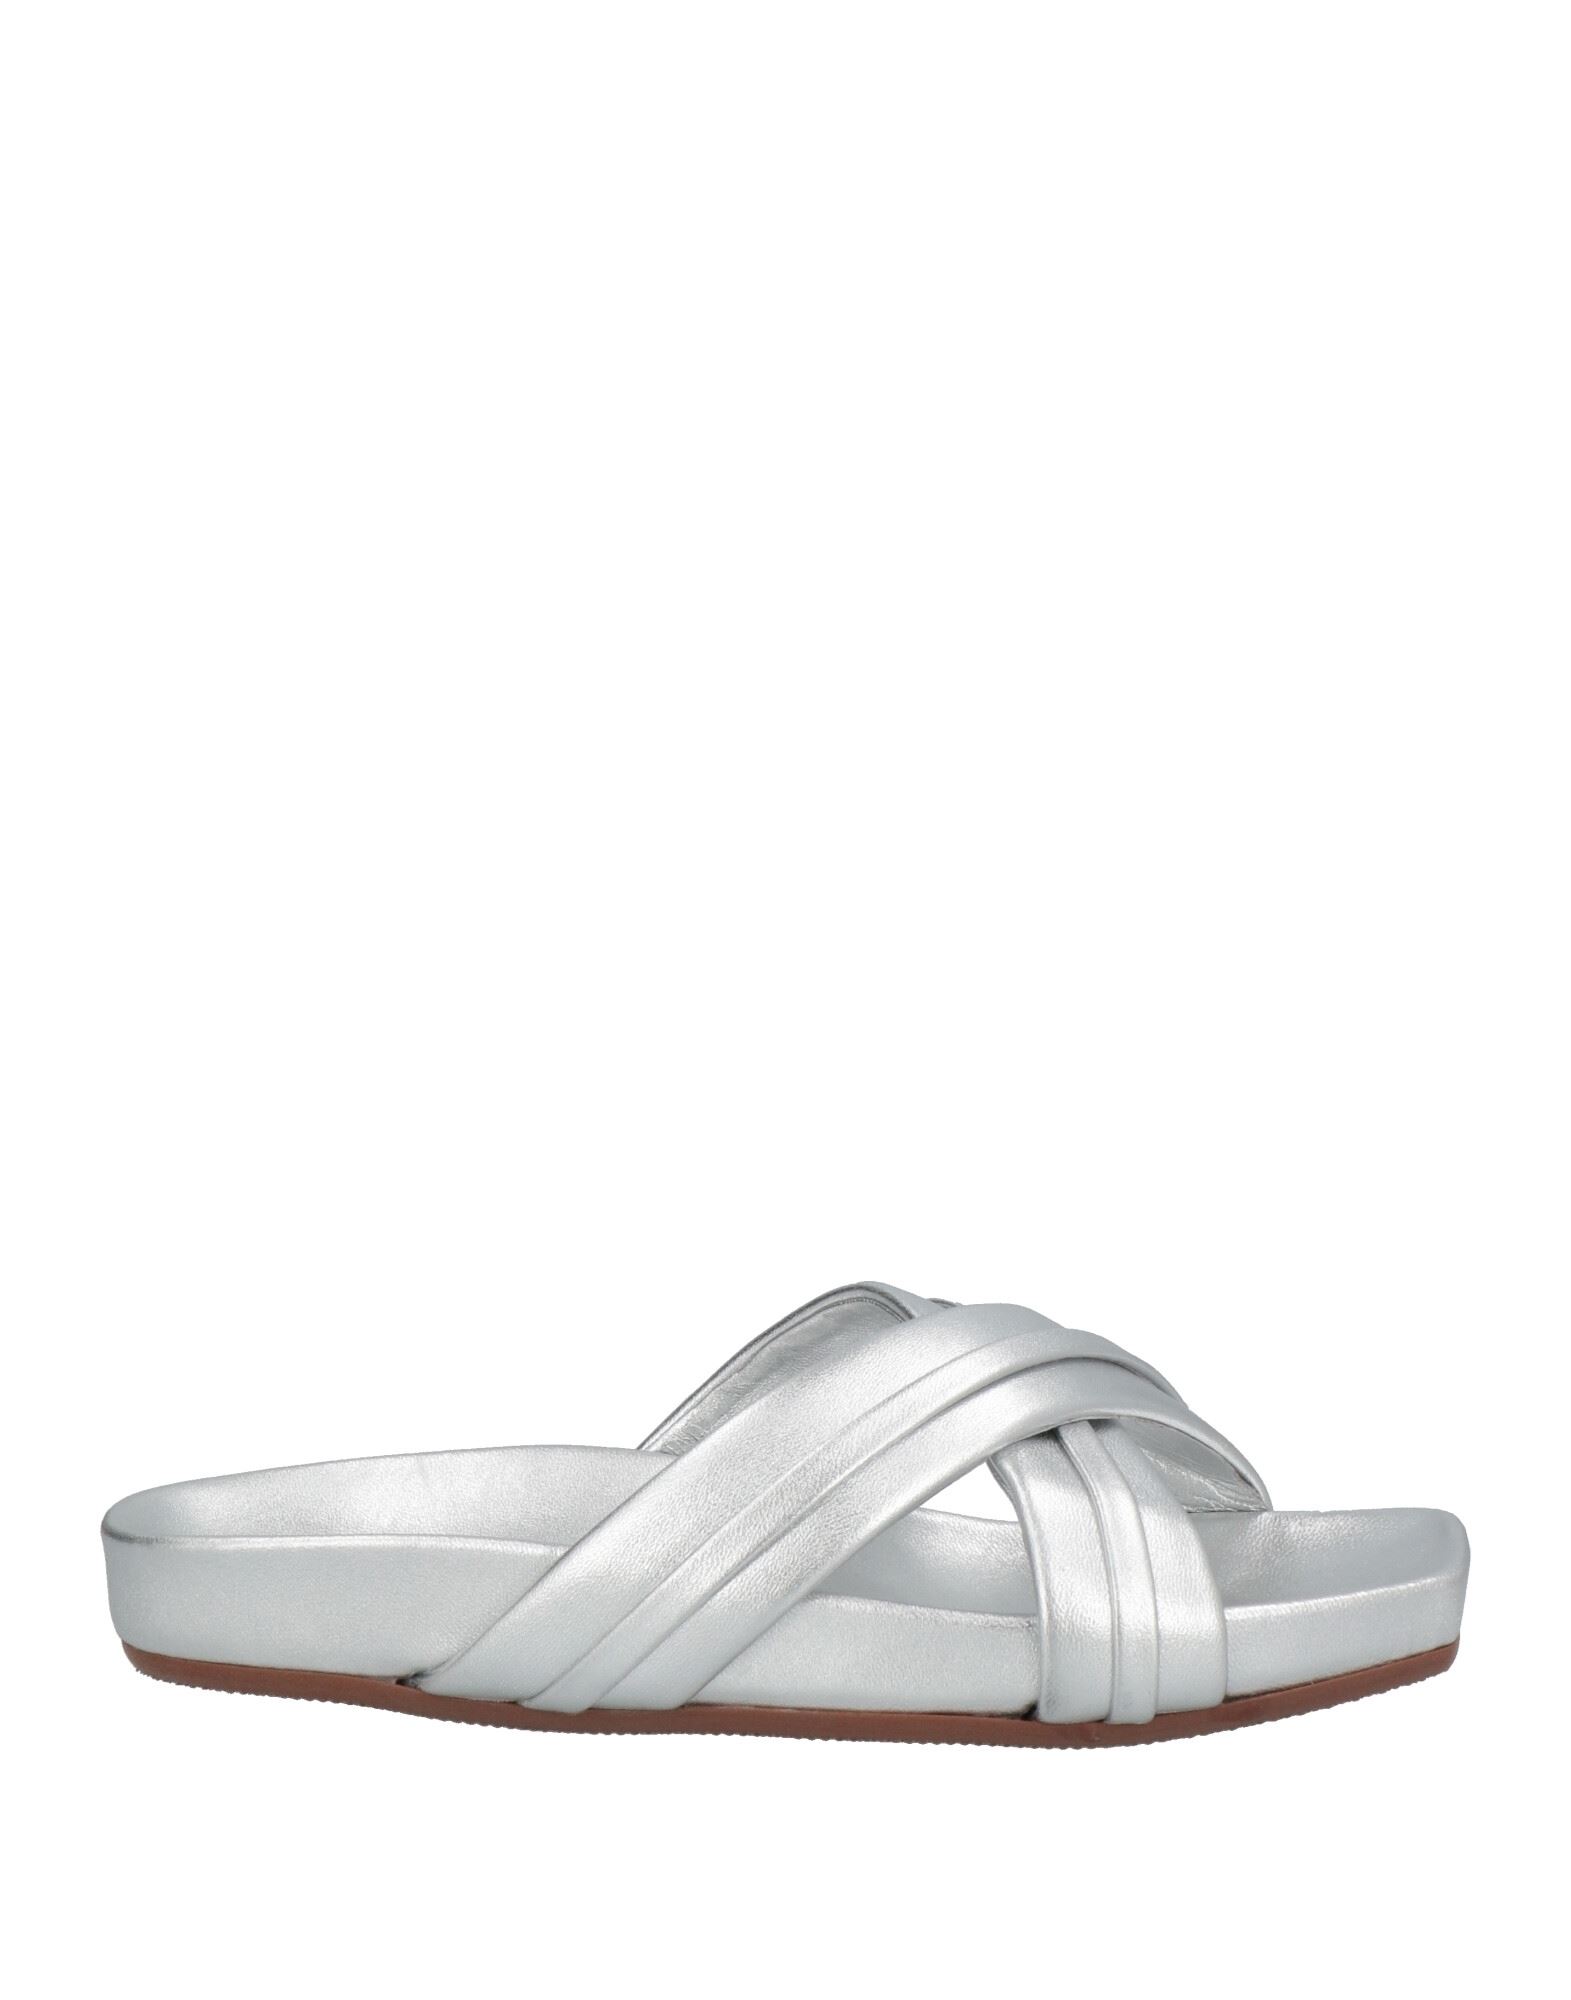 Malone Souliers Sandals In Silver